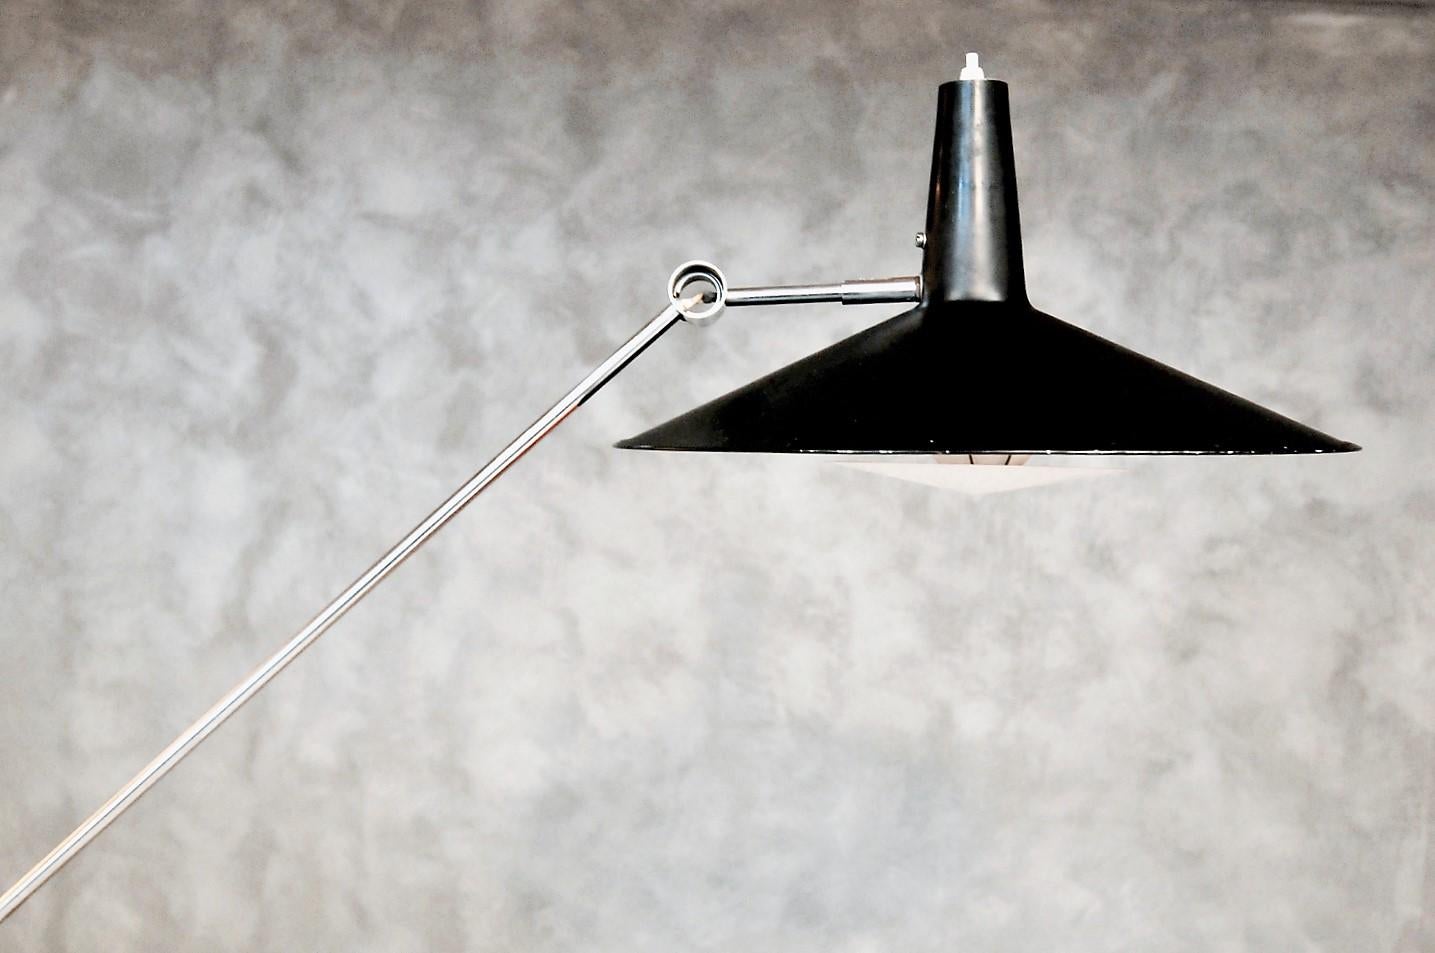 This very rare model 600 lamp, also known as Chinese hat, is equipped with a counterweight system. The lamp can be adjusted into different positions. The metal screen is painted black, while the reflector and base are painted white which is unusual